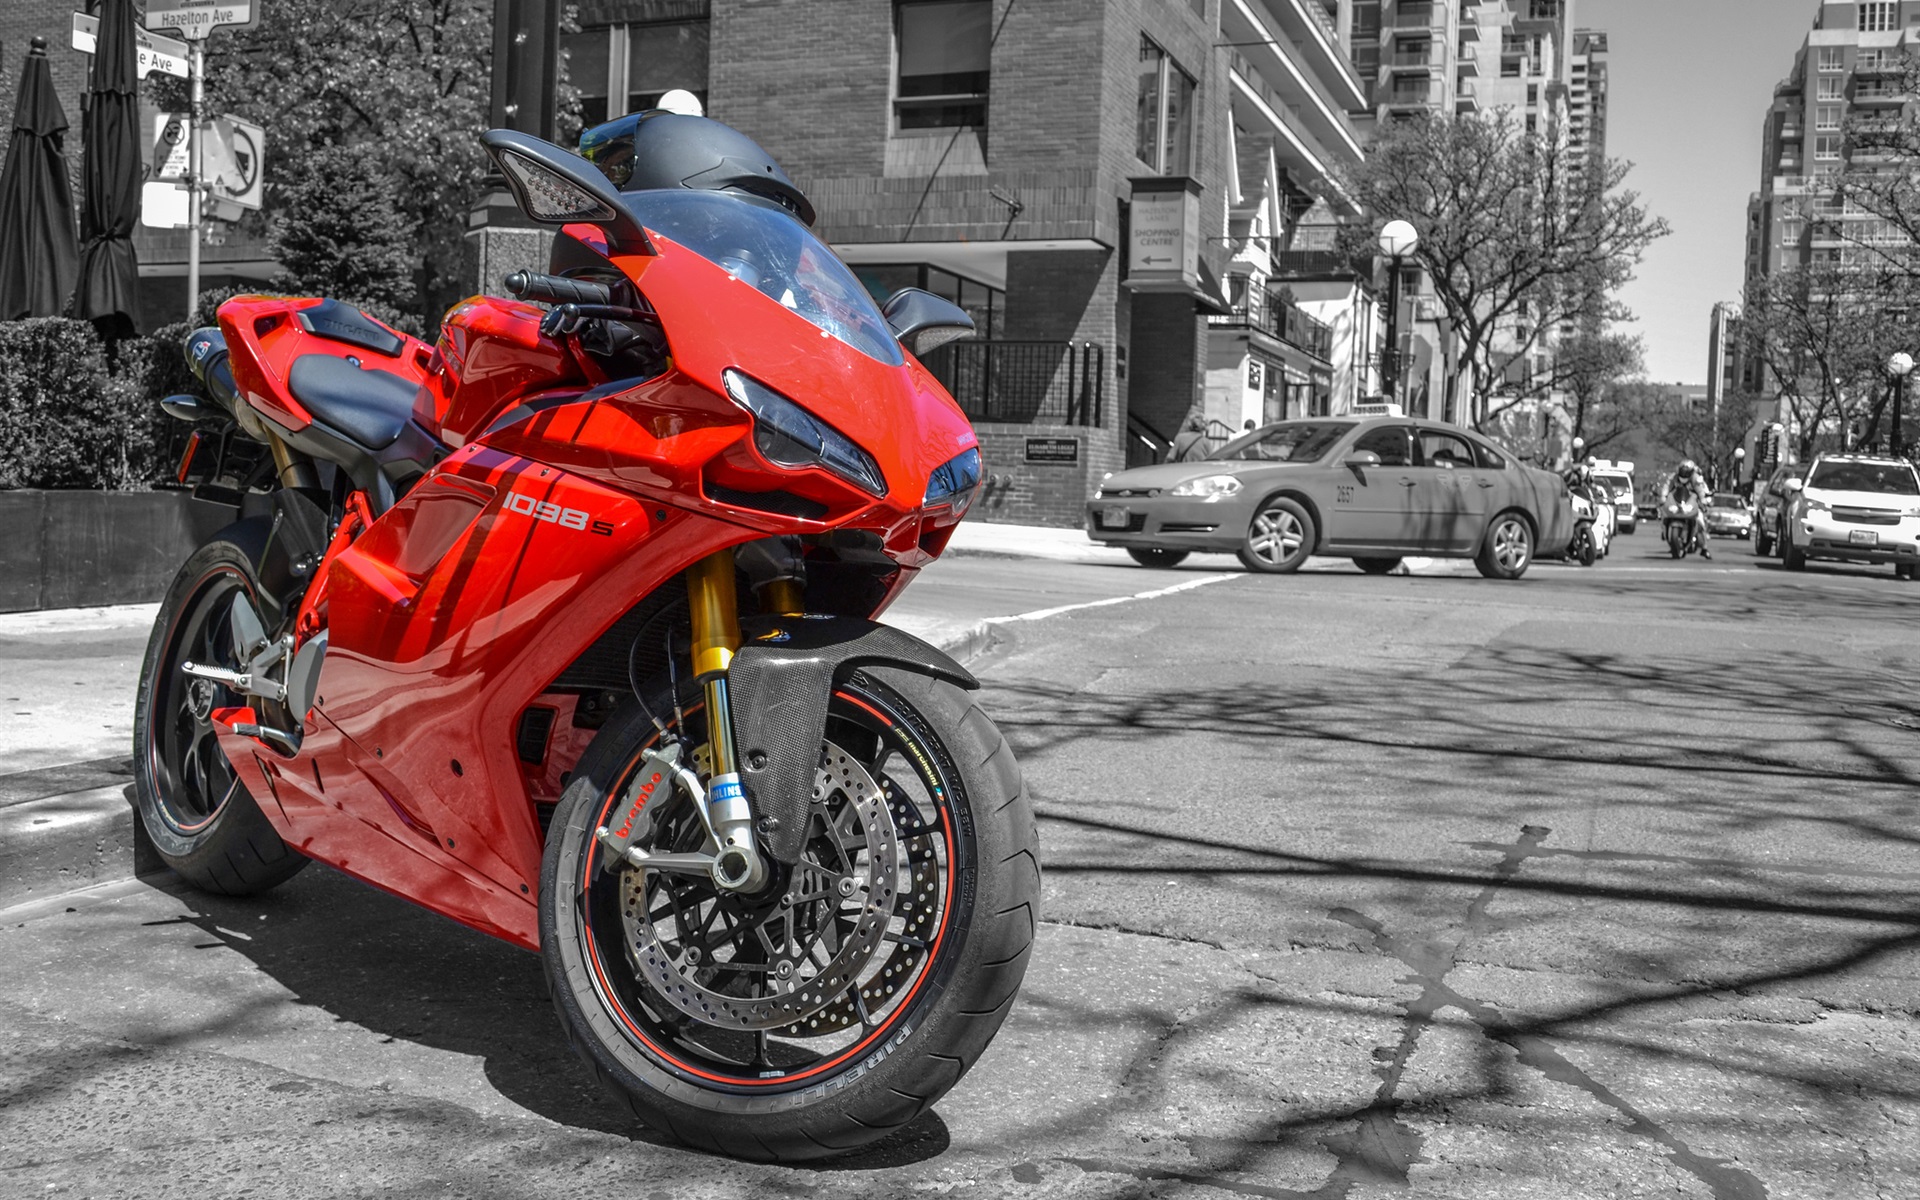 Wallpaper Ducati 1098S red motorcycle at street 1920x1200 HD